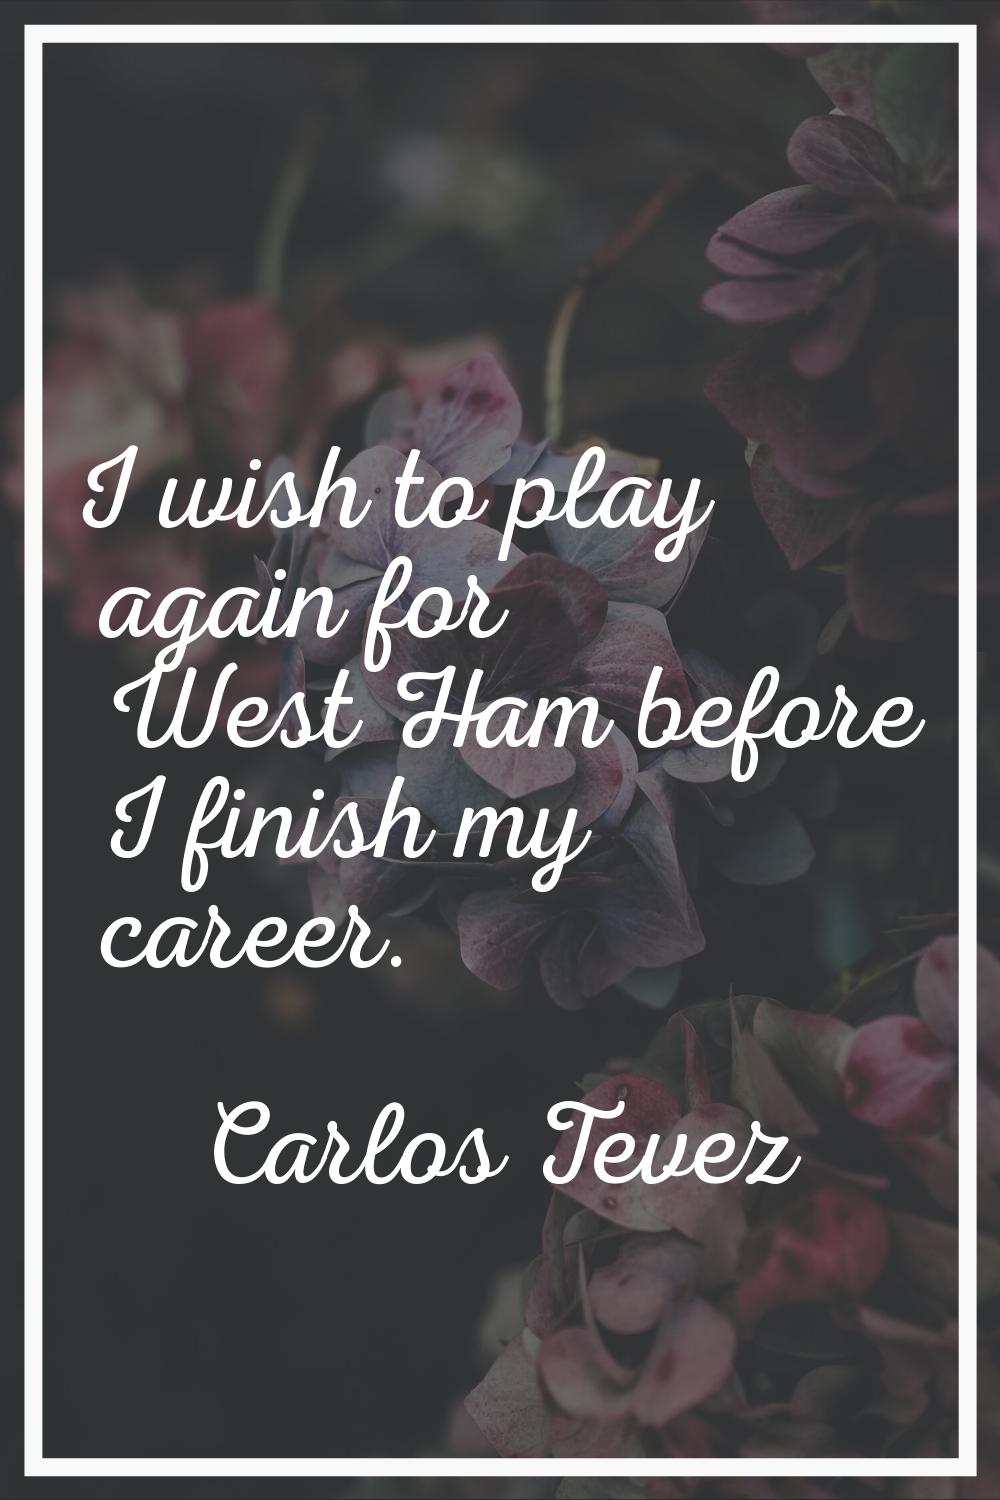 I wish to play again for West Ham before I finish my career.